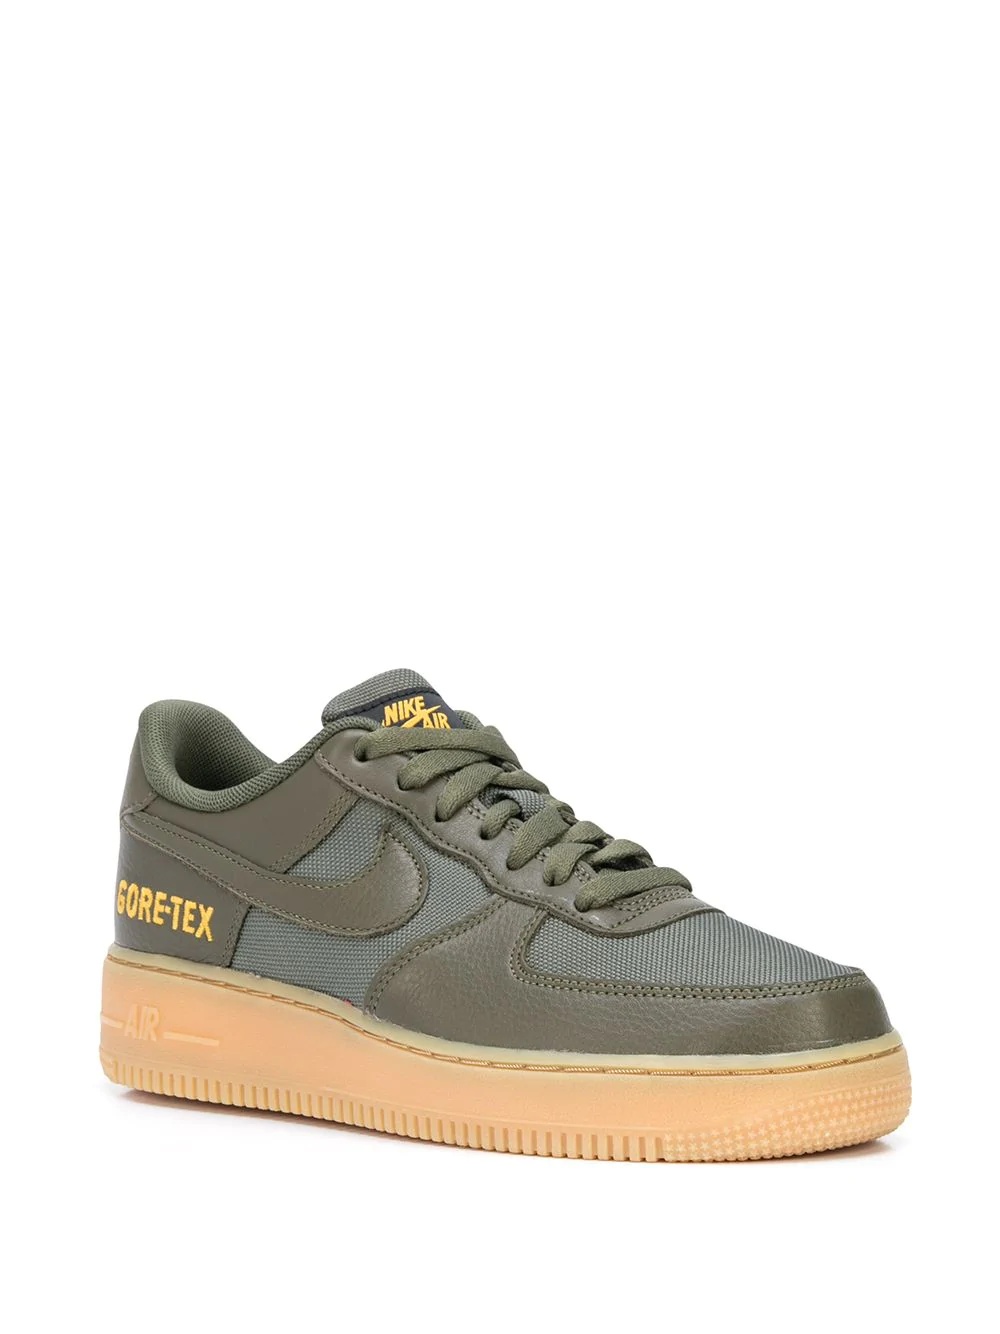 Air Force 1 GORE-TEX "Olive" sneakers - 2